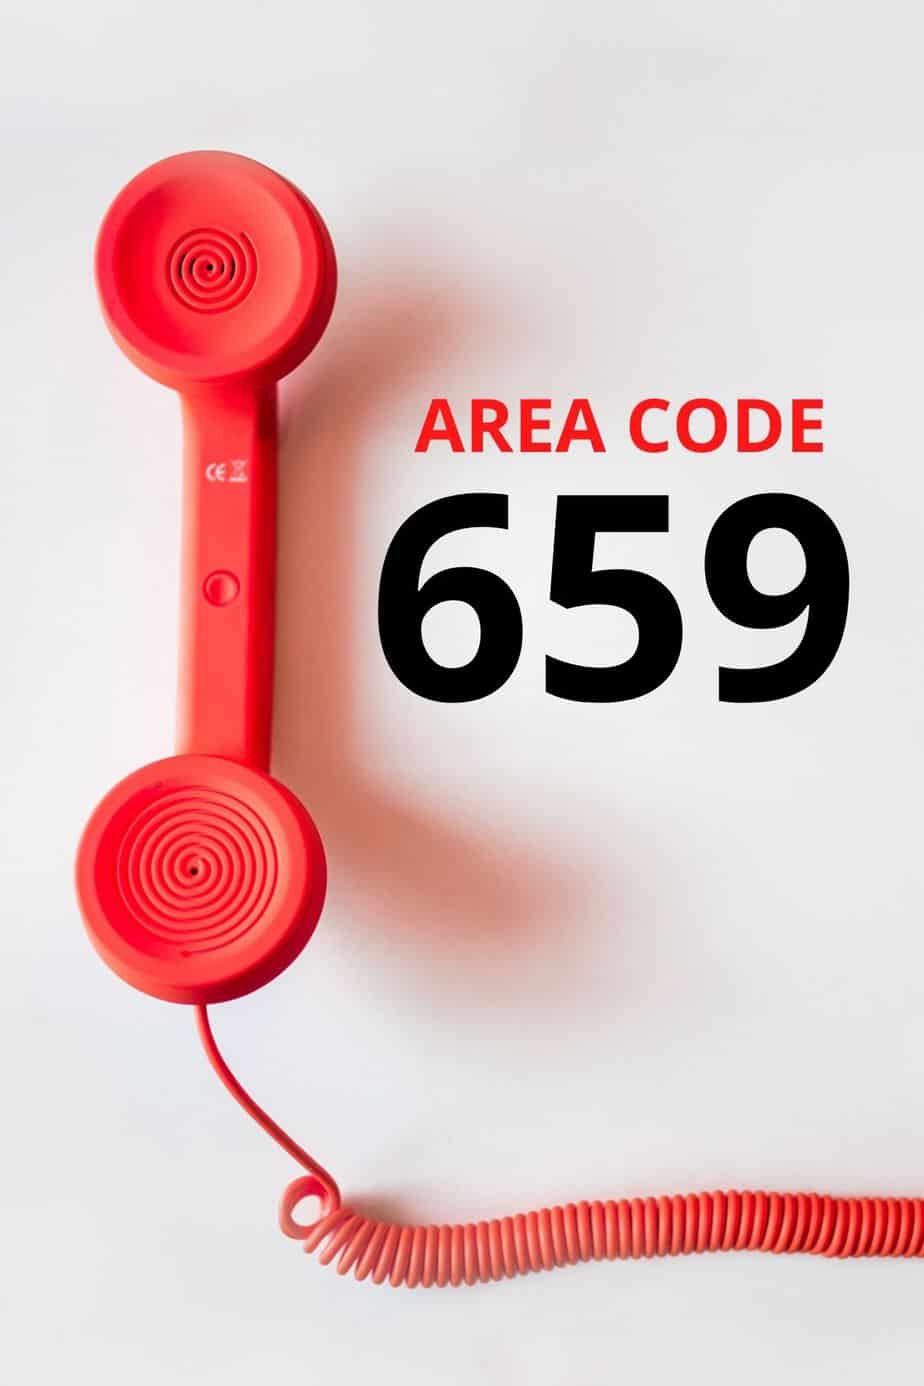 Area Code 659 Meaning